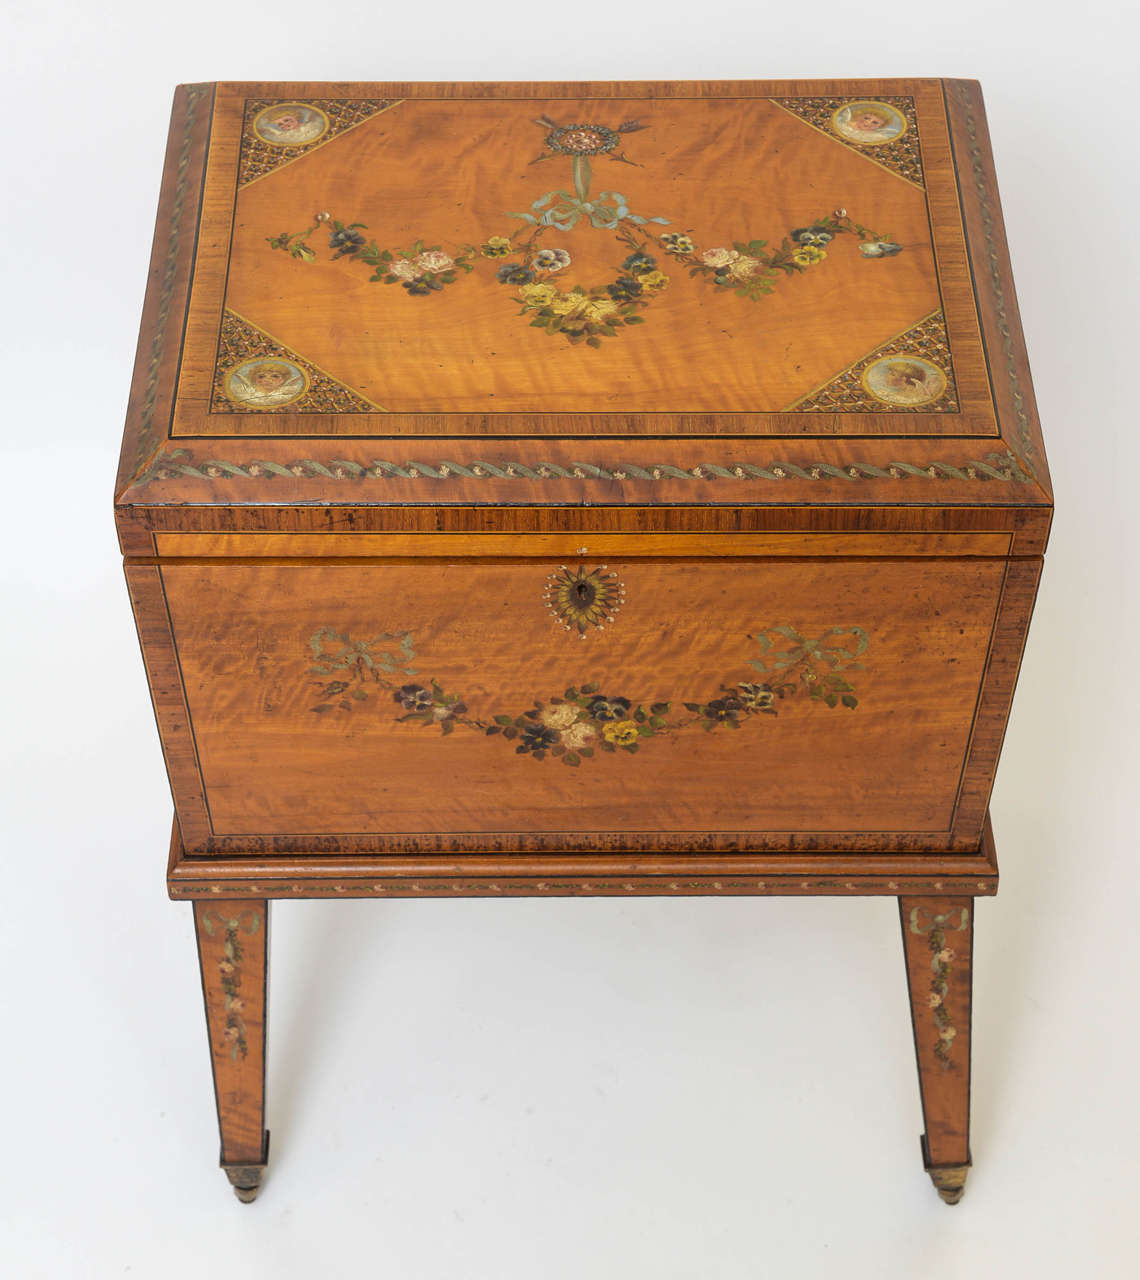 Adam style wine cooler with hand-painted decorations, adorned with cherubs and floral festoons. Satinwood. Now felt lined and raised upon original brass castors.